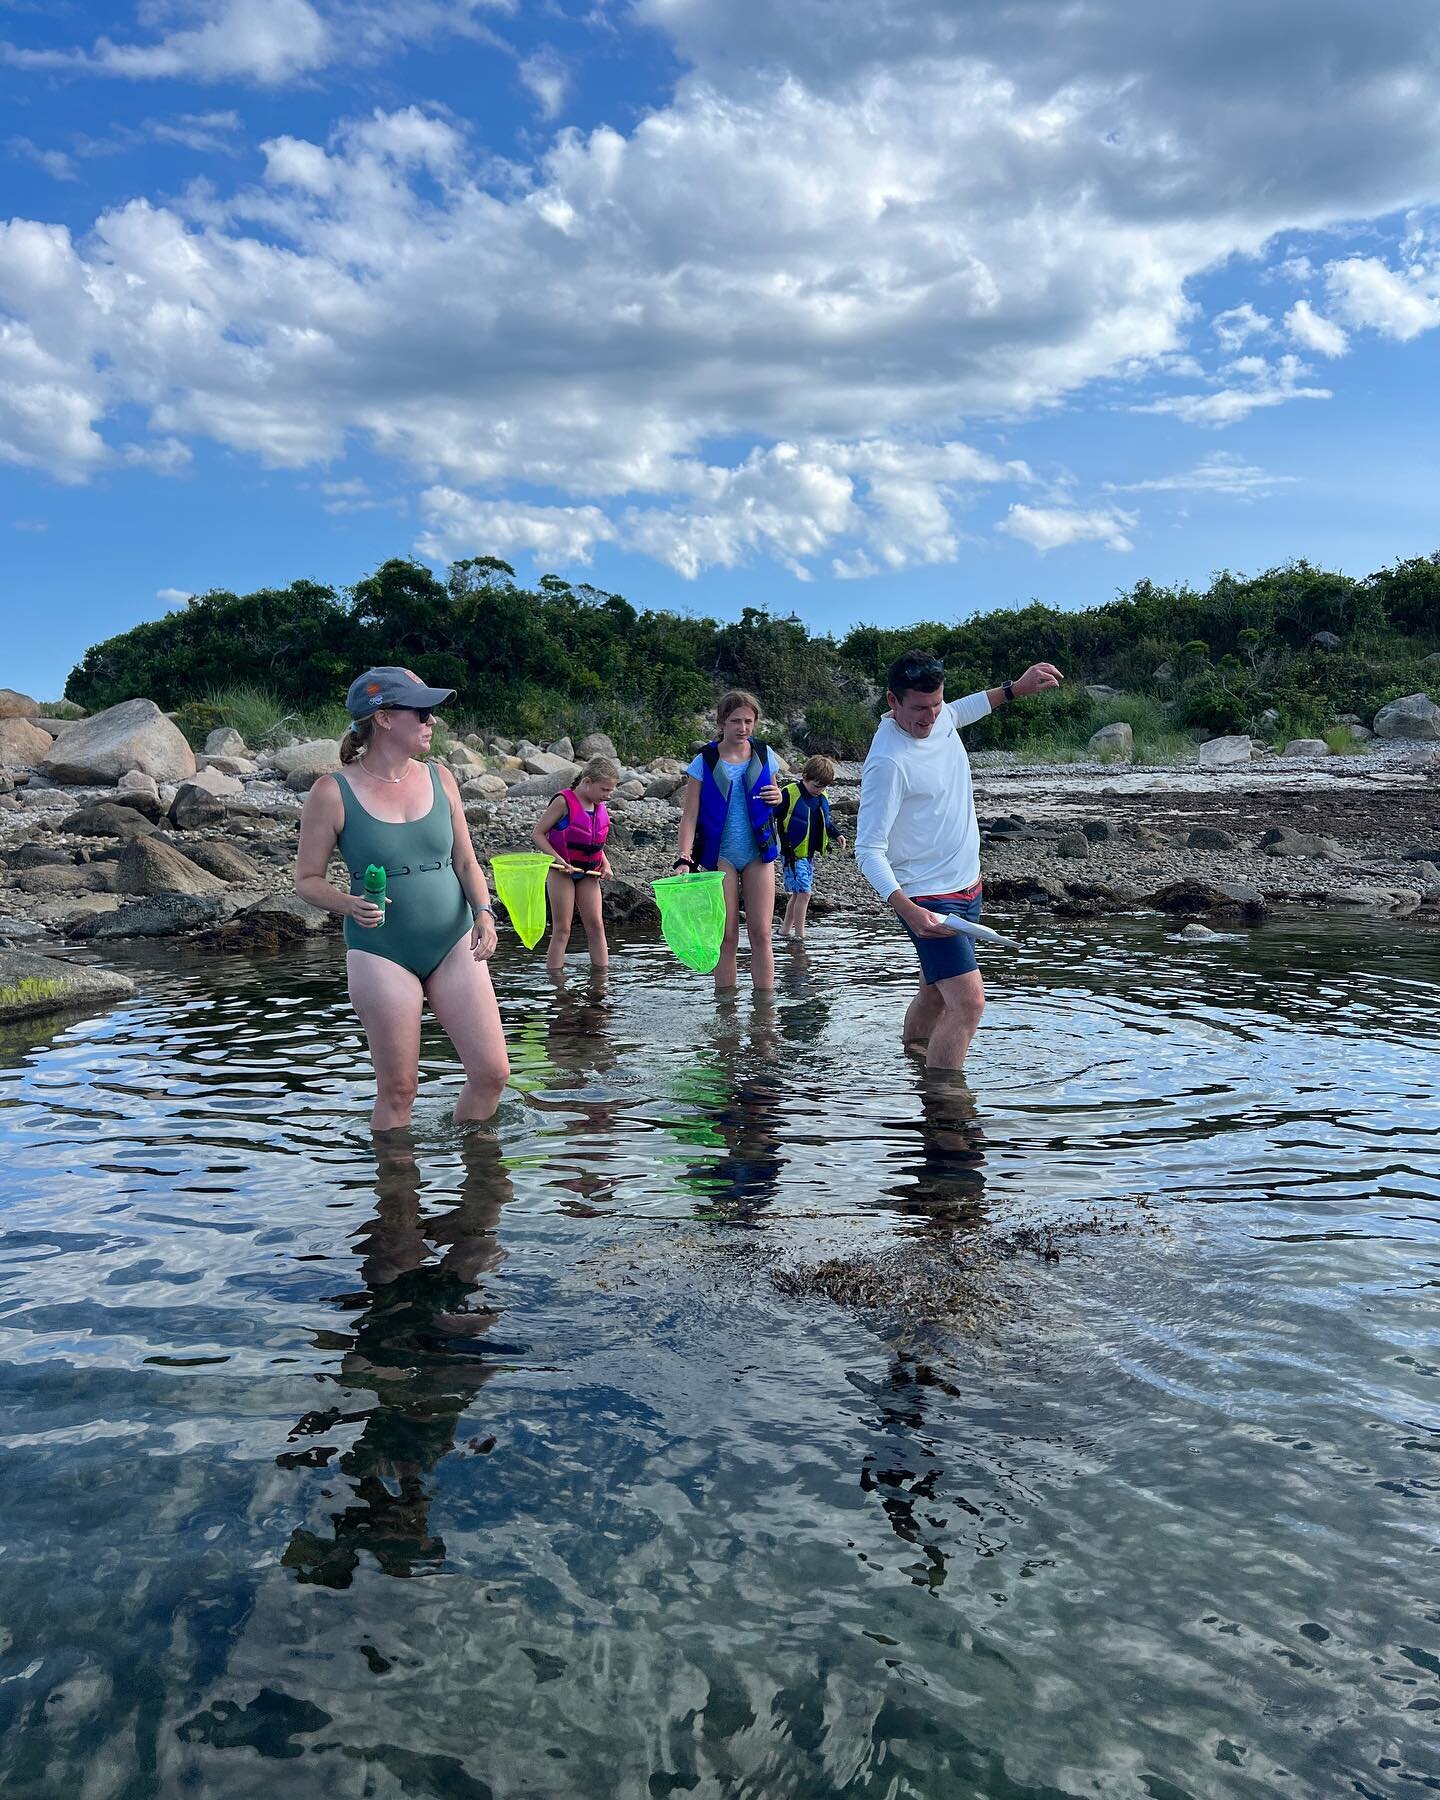 Brilliant day exploring at Tarpaulin Cove yesterday. A scavenger hunt, catching critters and jumping off the boat make it an exciting trip for kids!